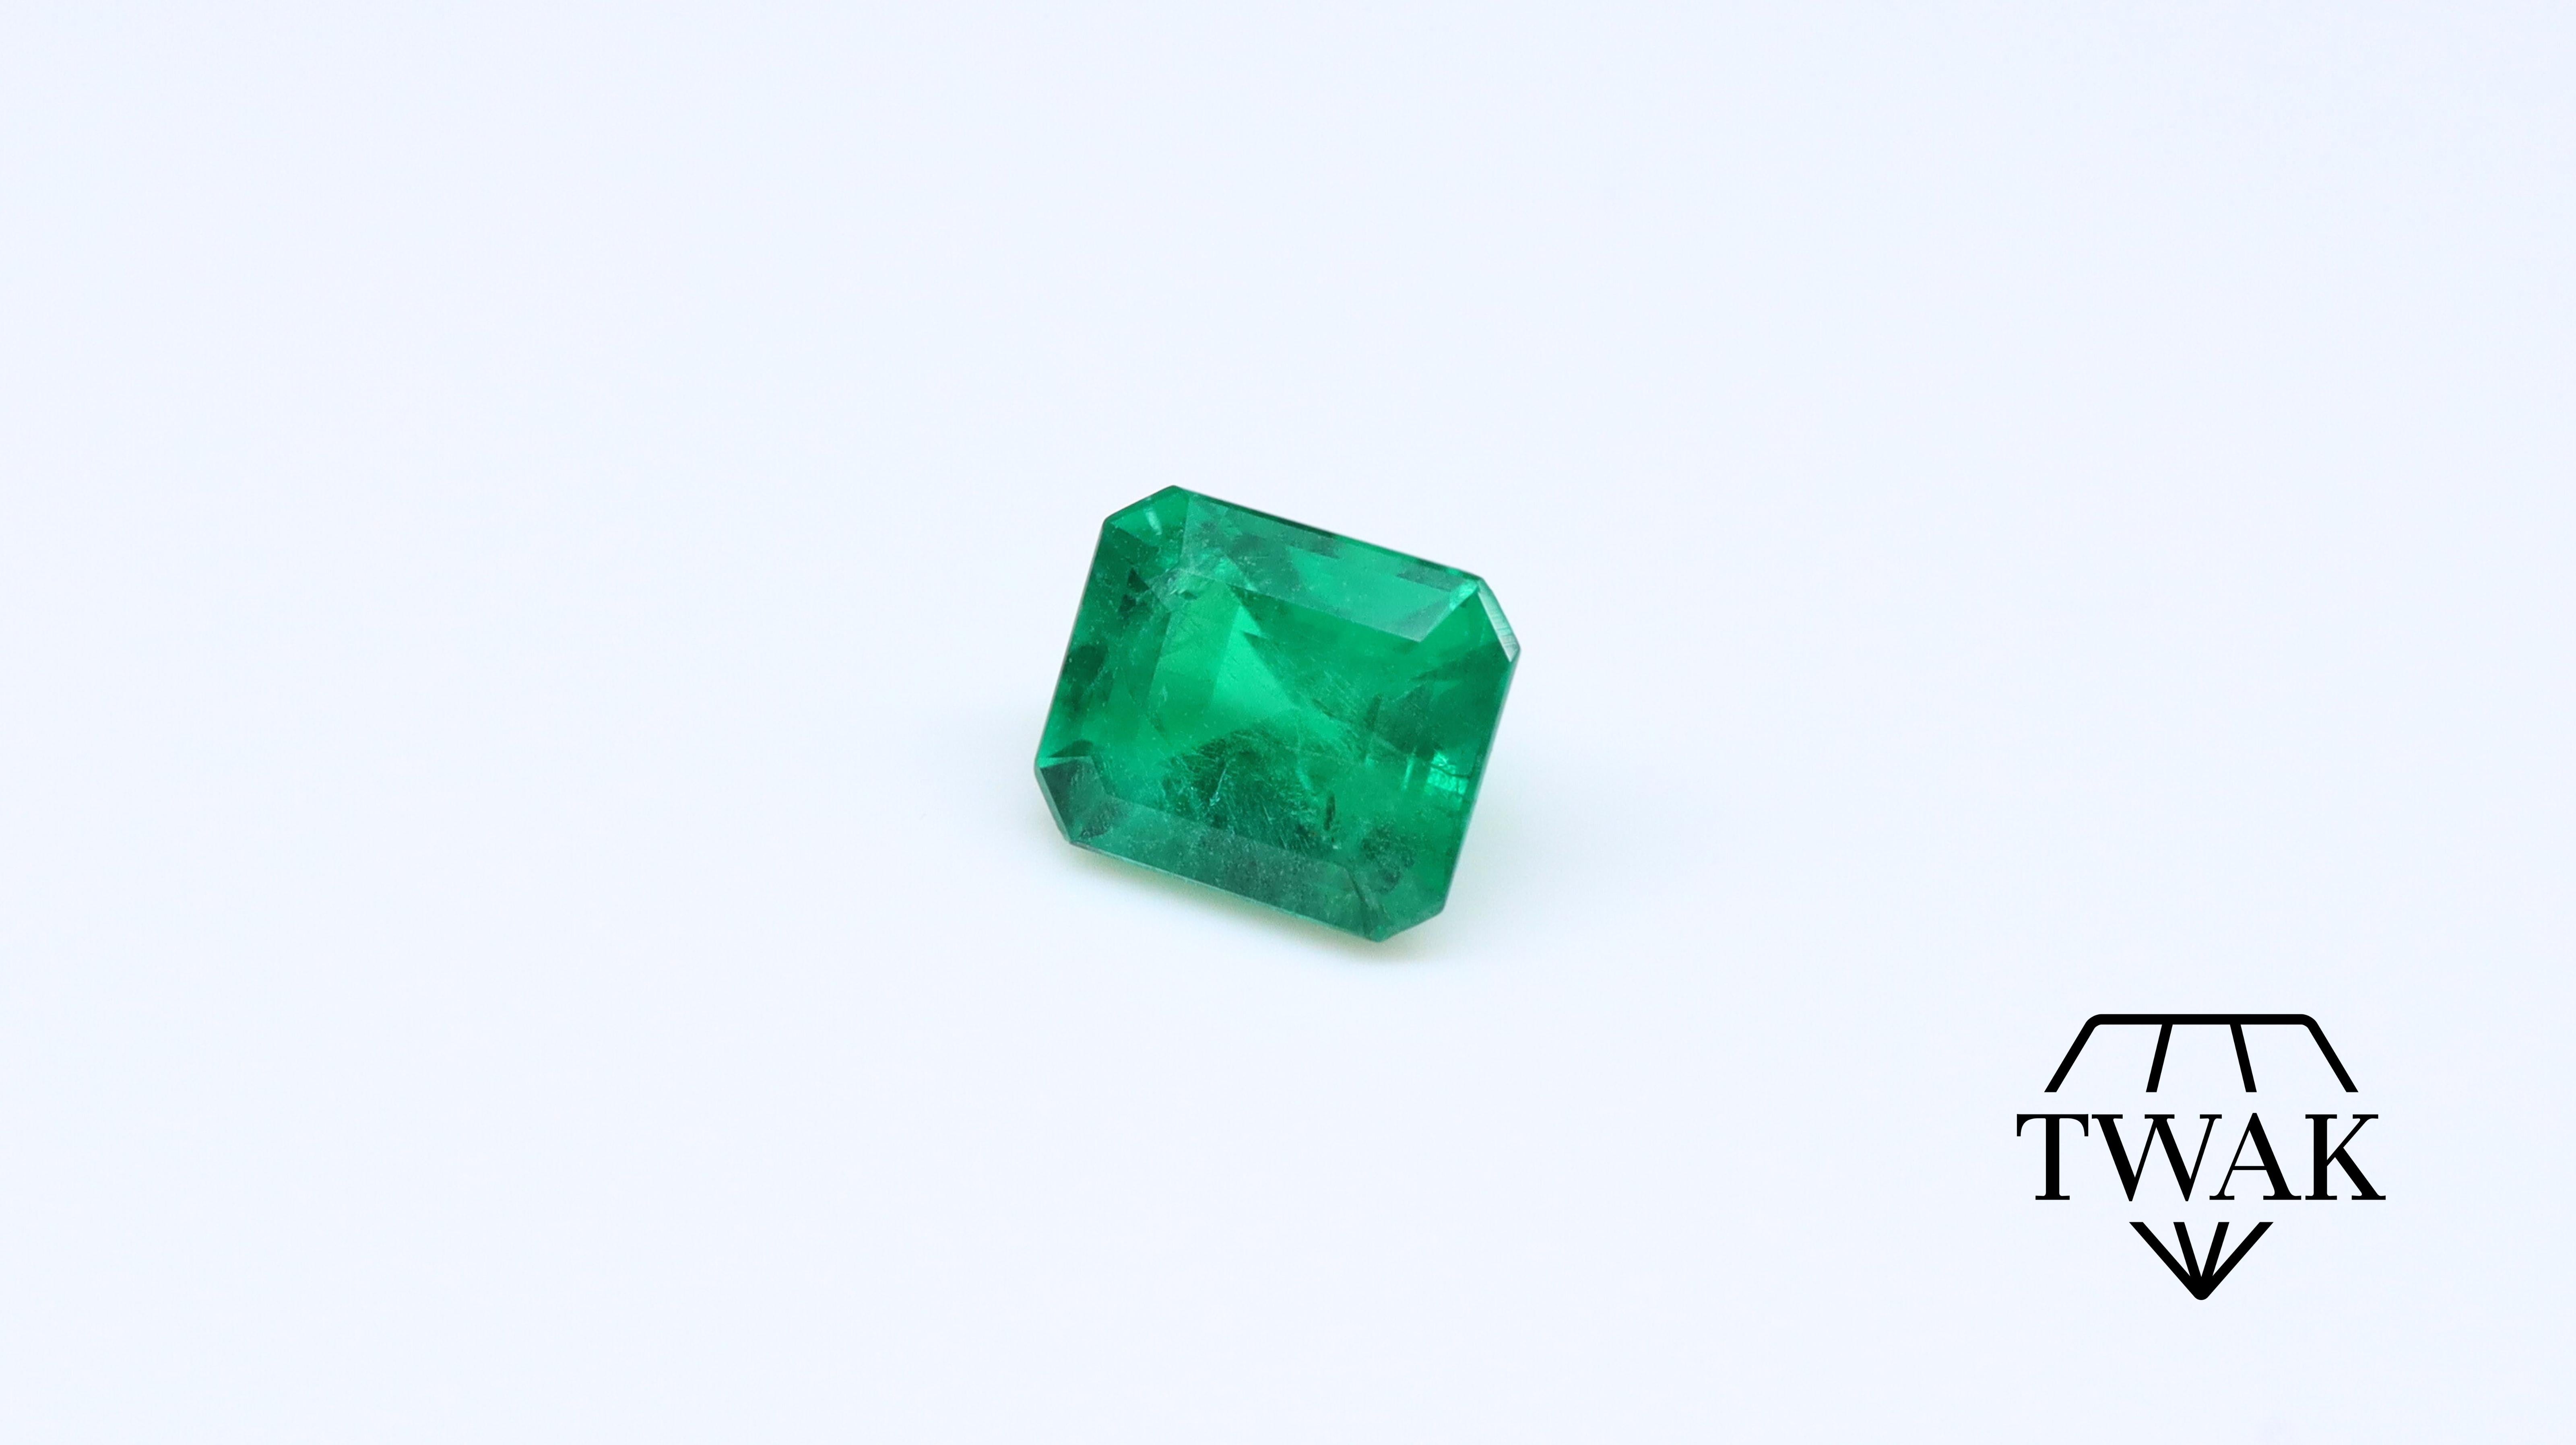 A beautiful Emerald with excellent color, crystal, and saturation.

Details and description:
Dimensions: 5.67 x 4.73 x 3.94mm
Weight: 0.71ct
Color: Vivid Green 
Treatment: Oil

Emeralds are naturally porous and inclusive stones, with surface